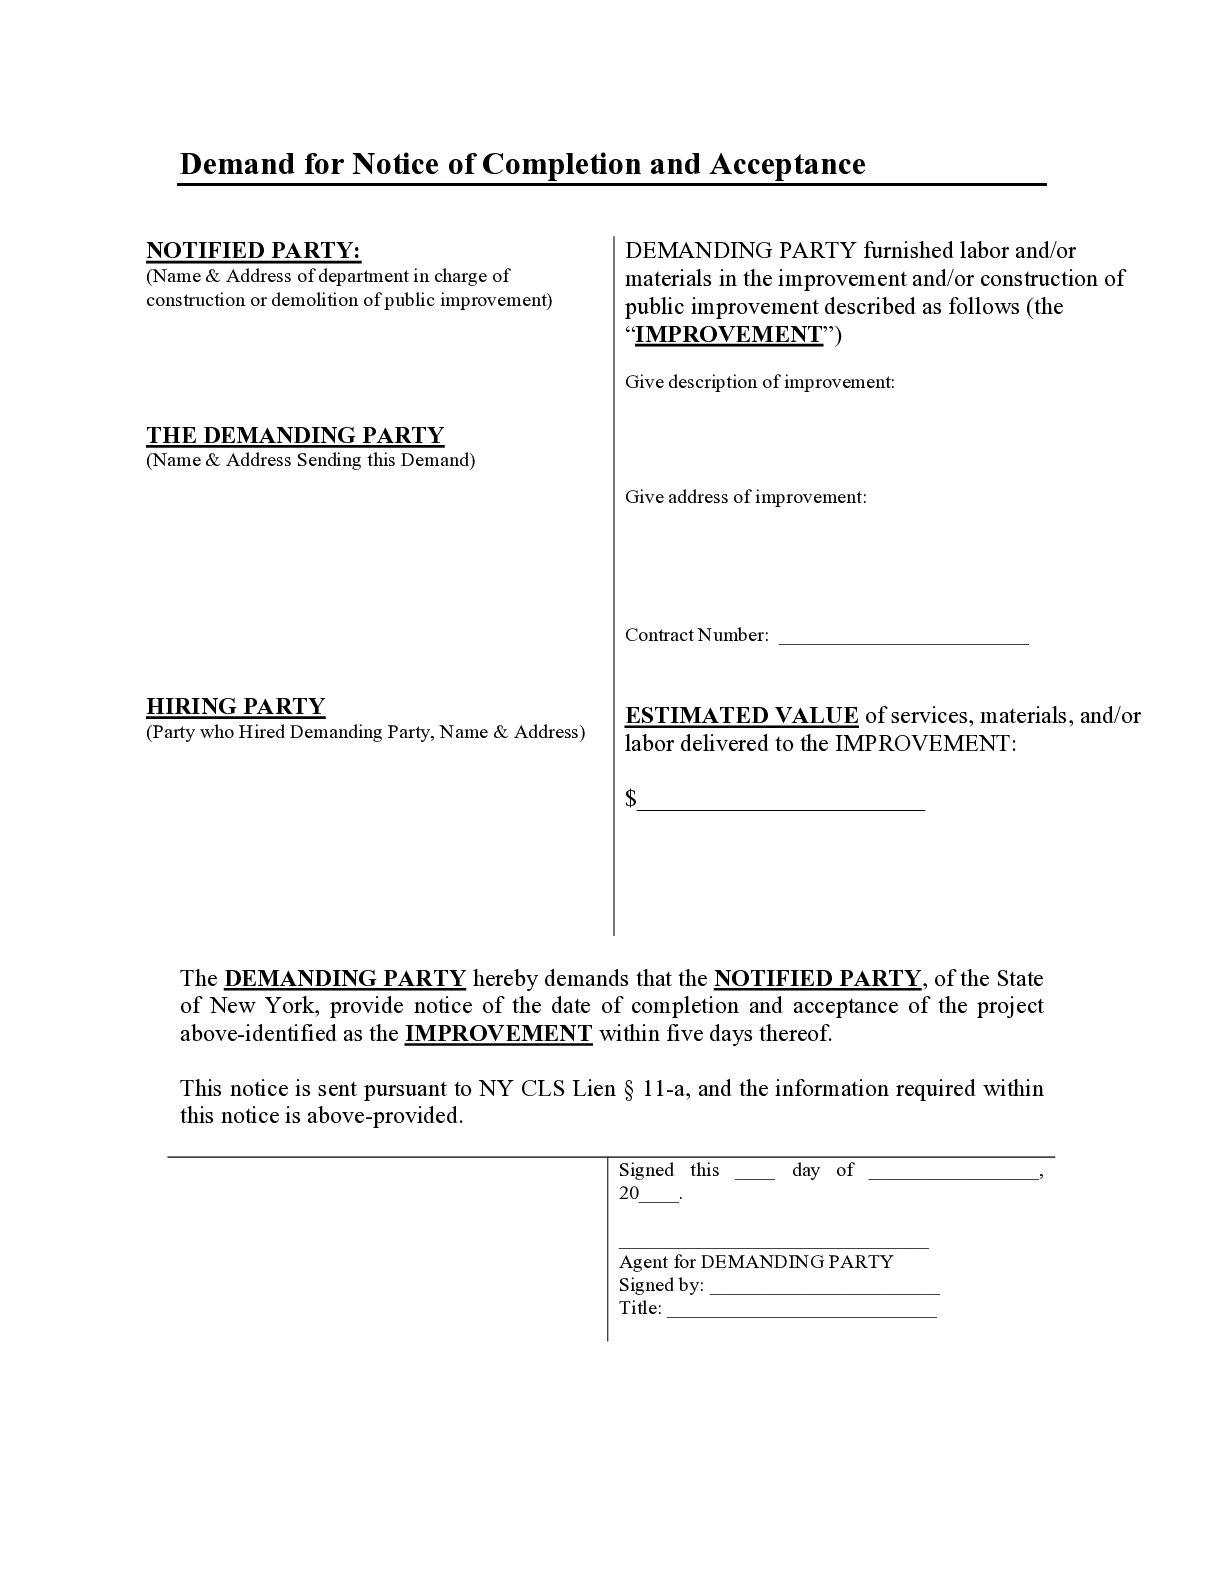 New York Demand for Notice Form